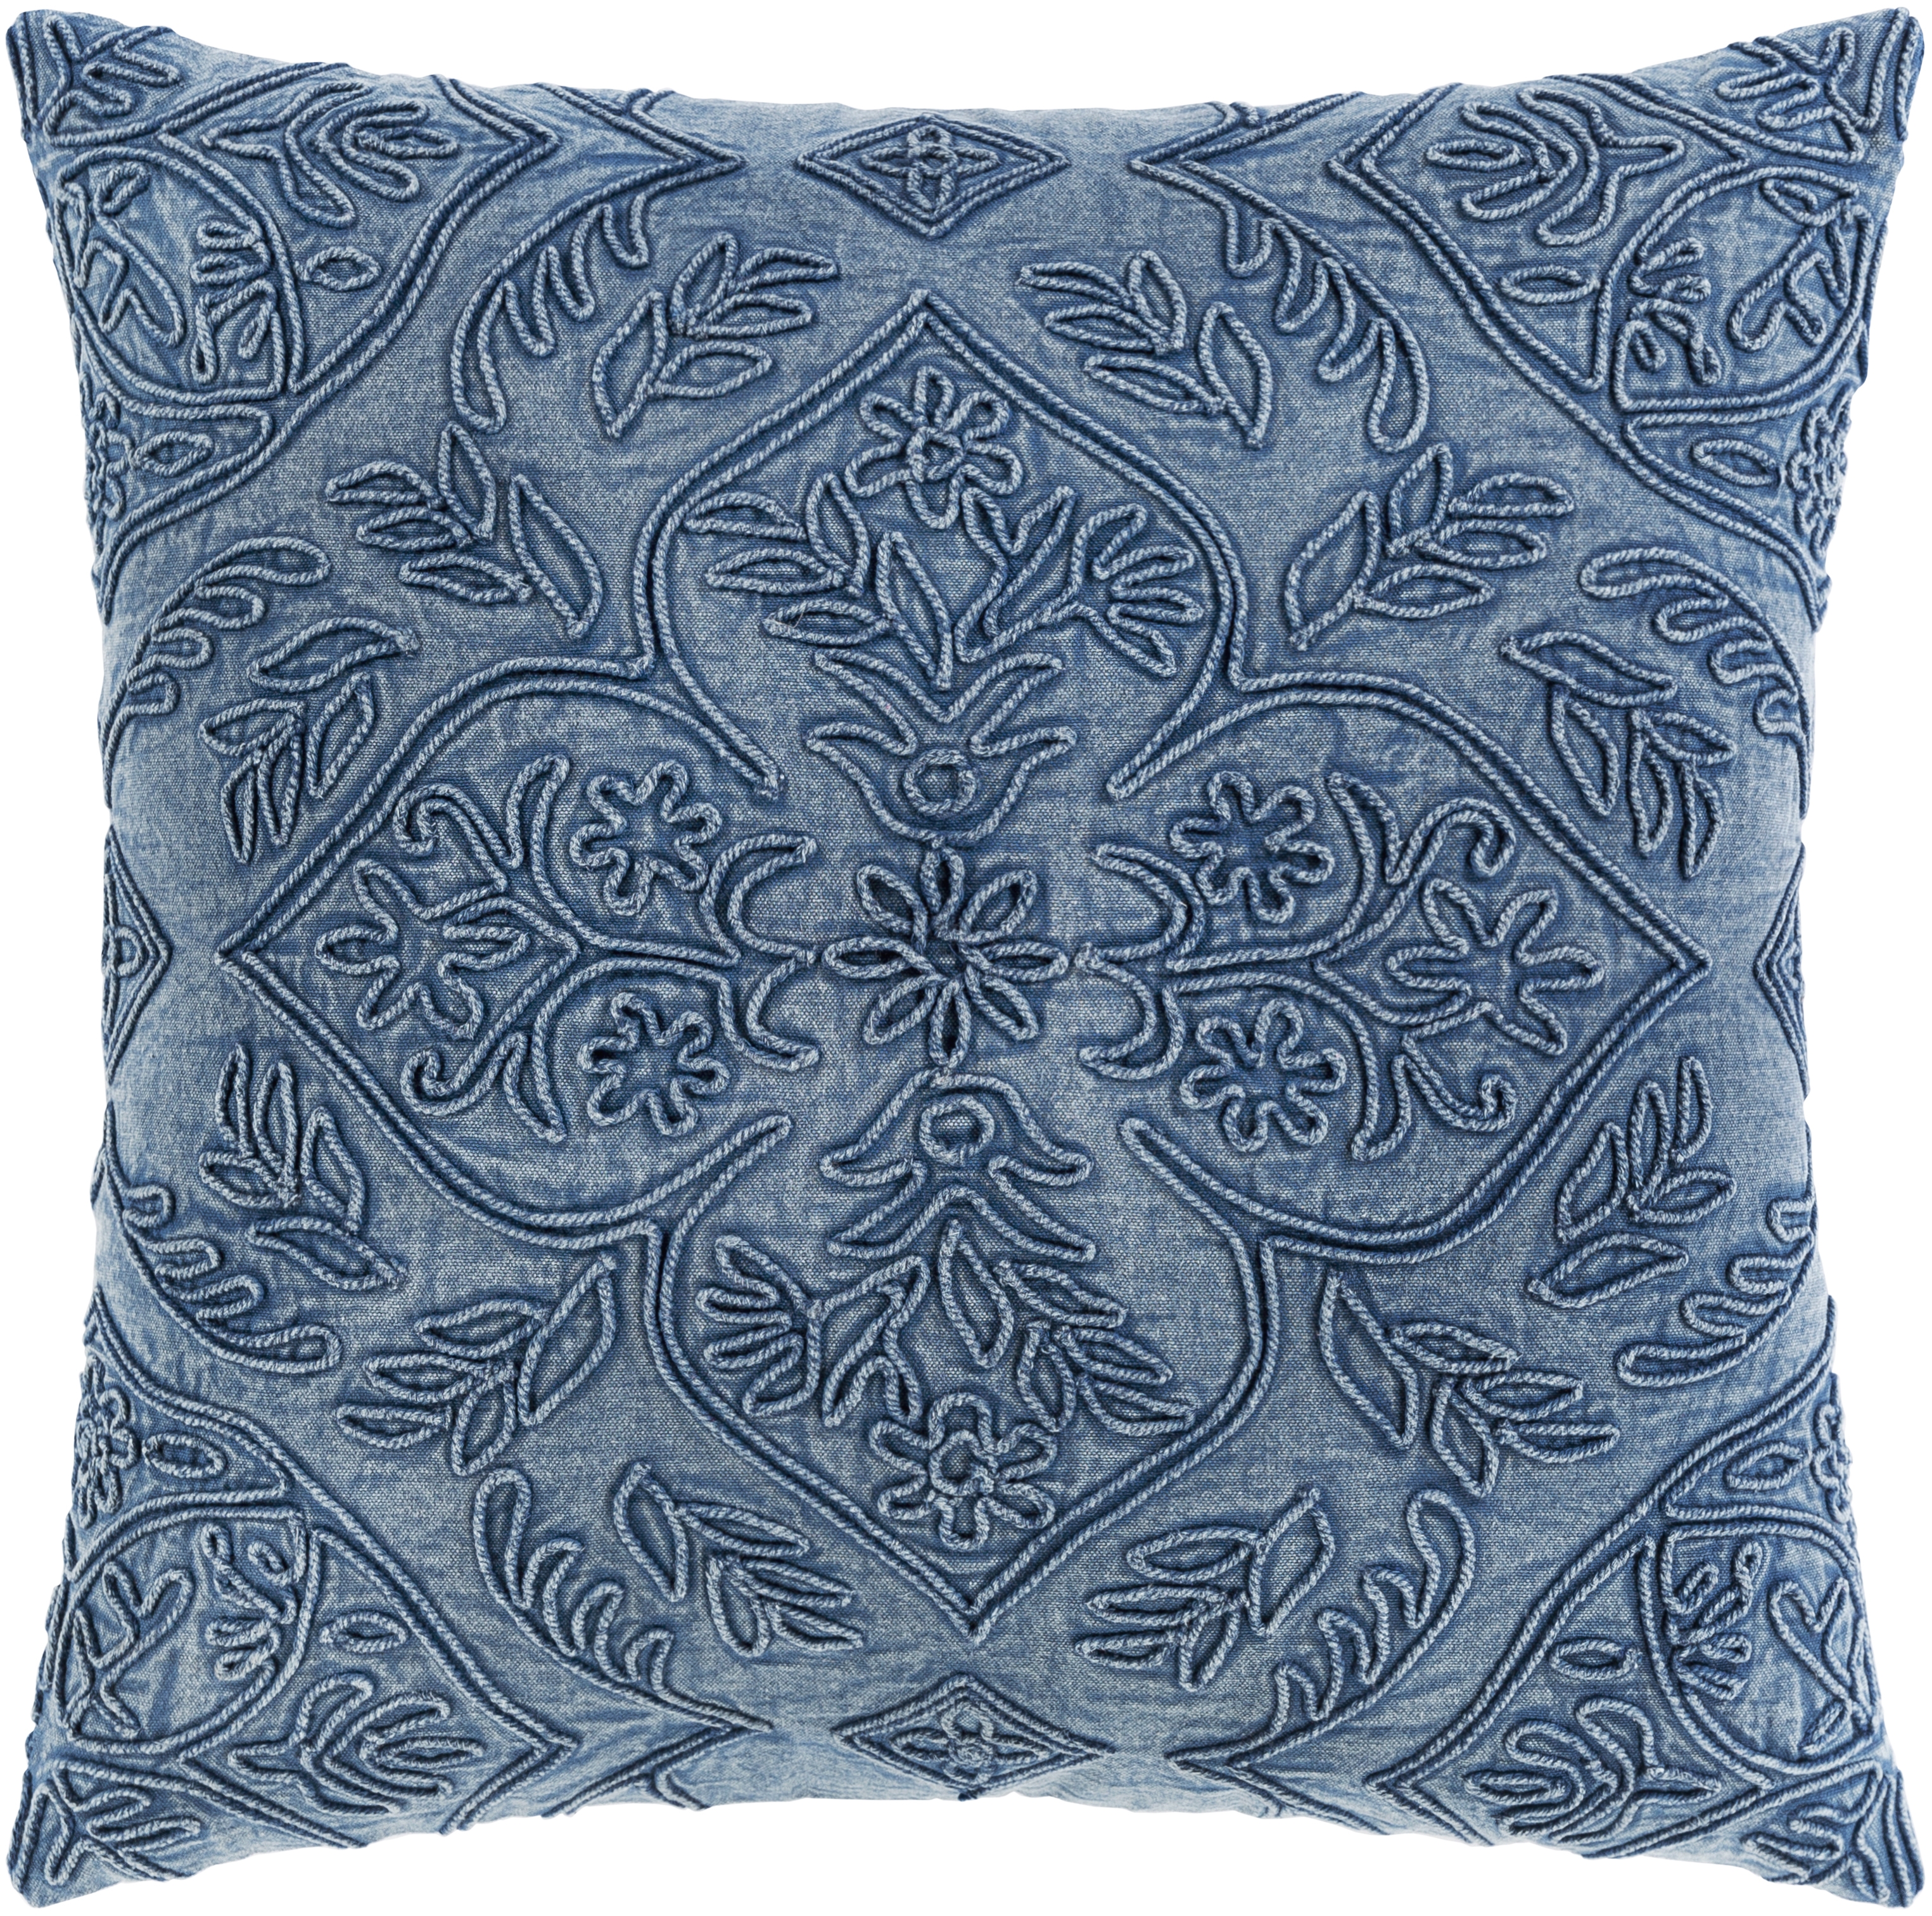 Wedgemore Throw Pillow, 20" x 20", with down insert - Image 0